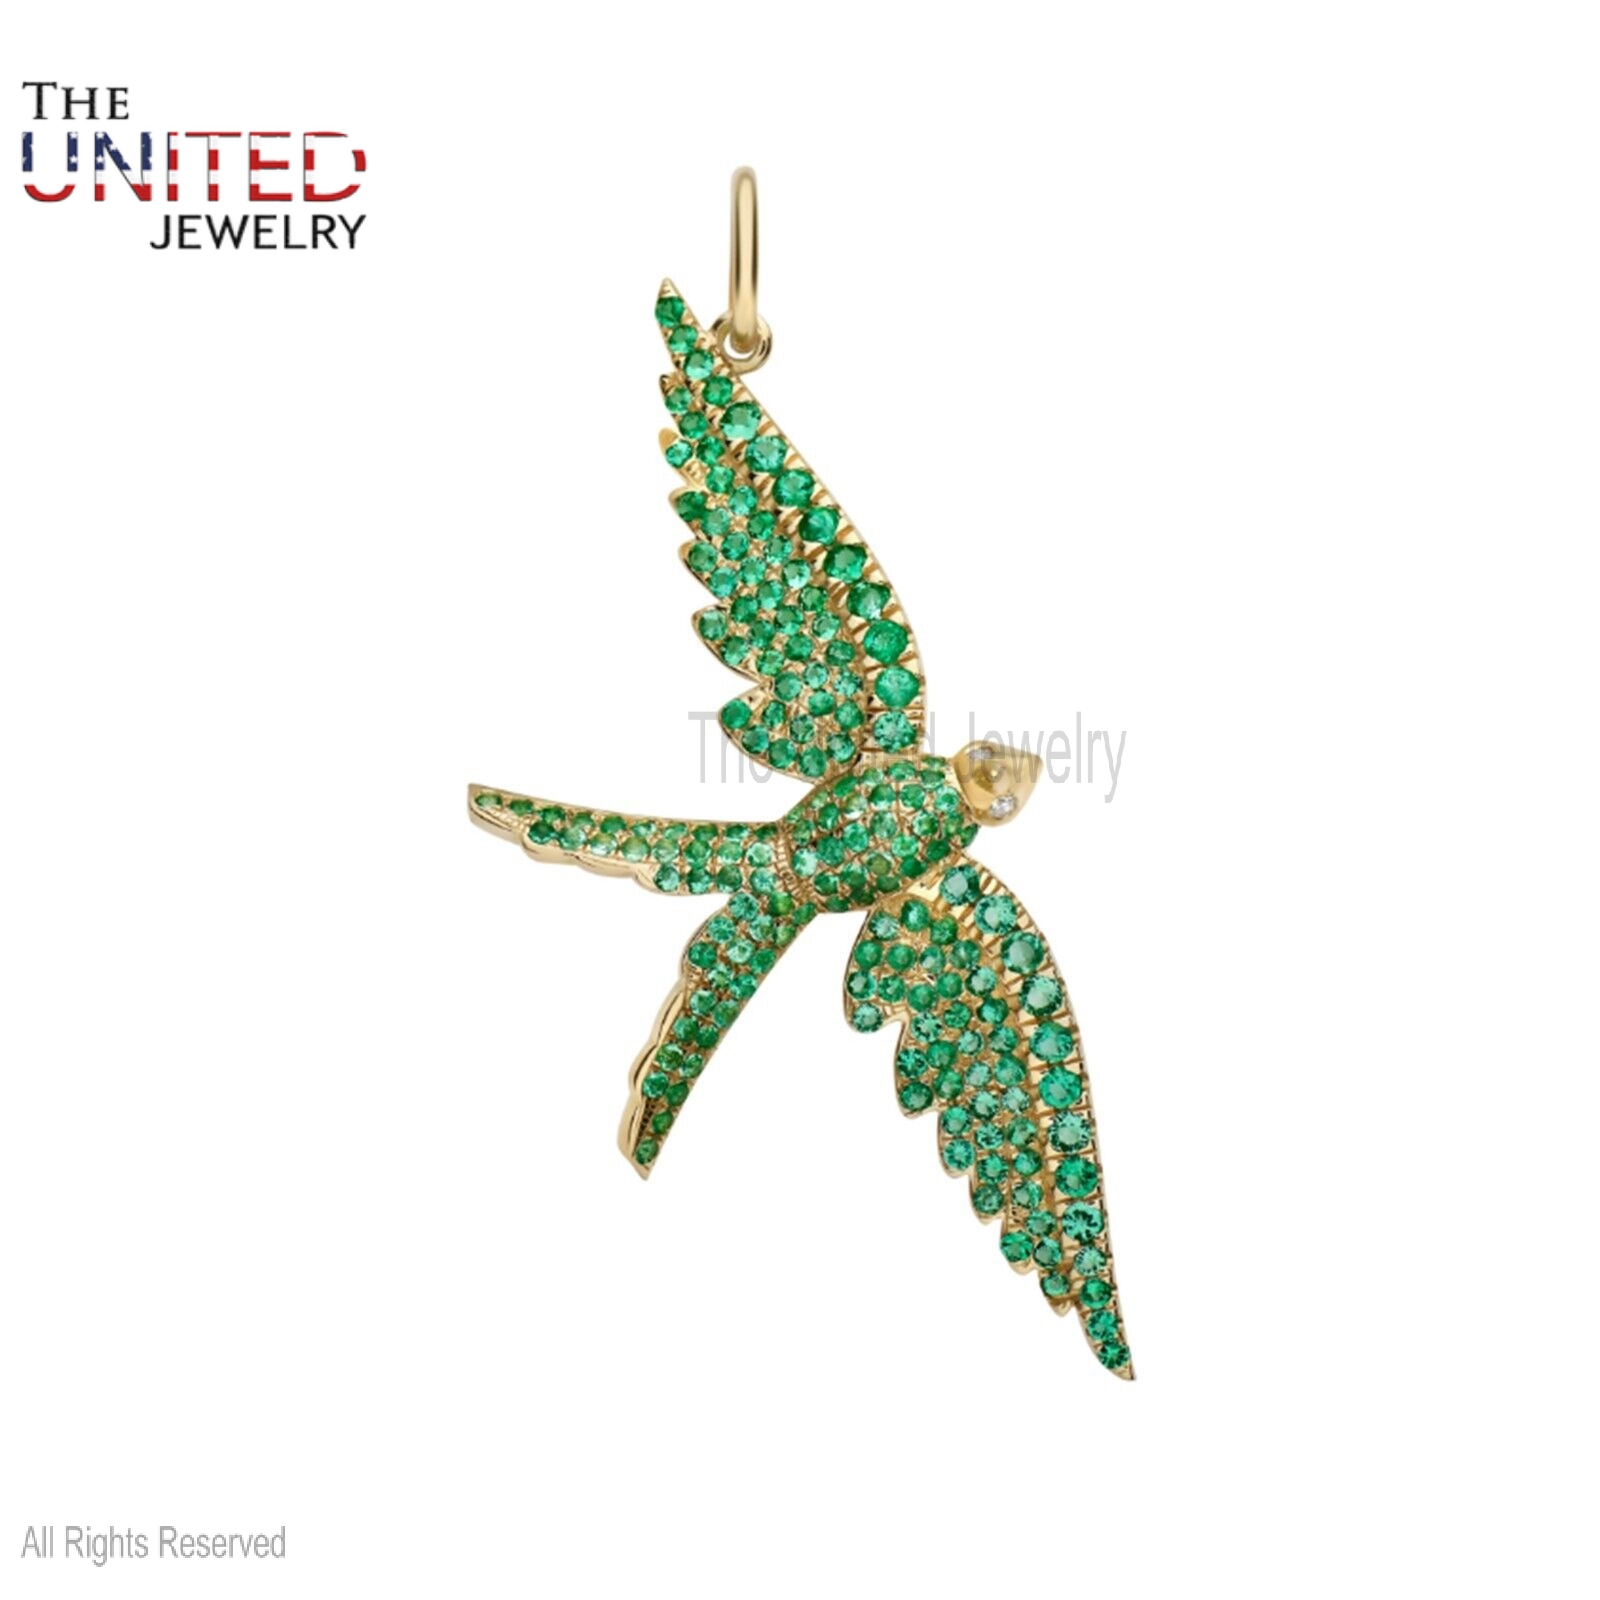 The United Jewelry